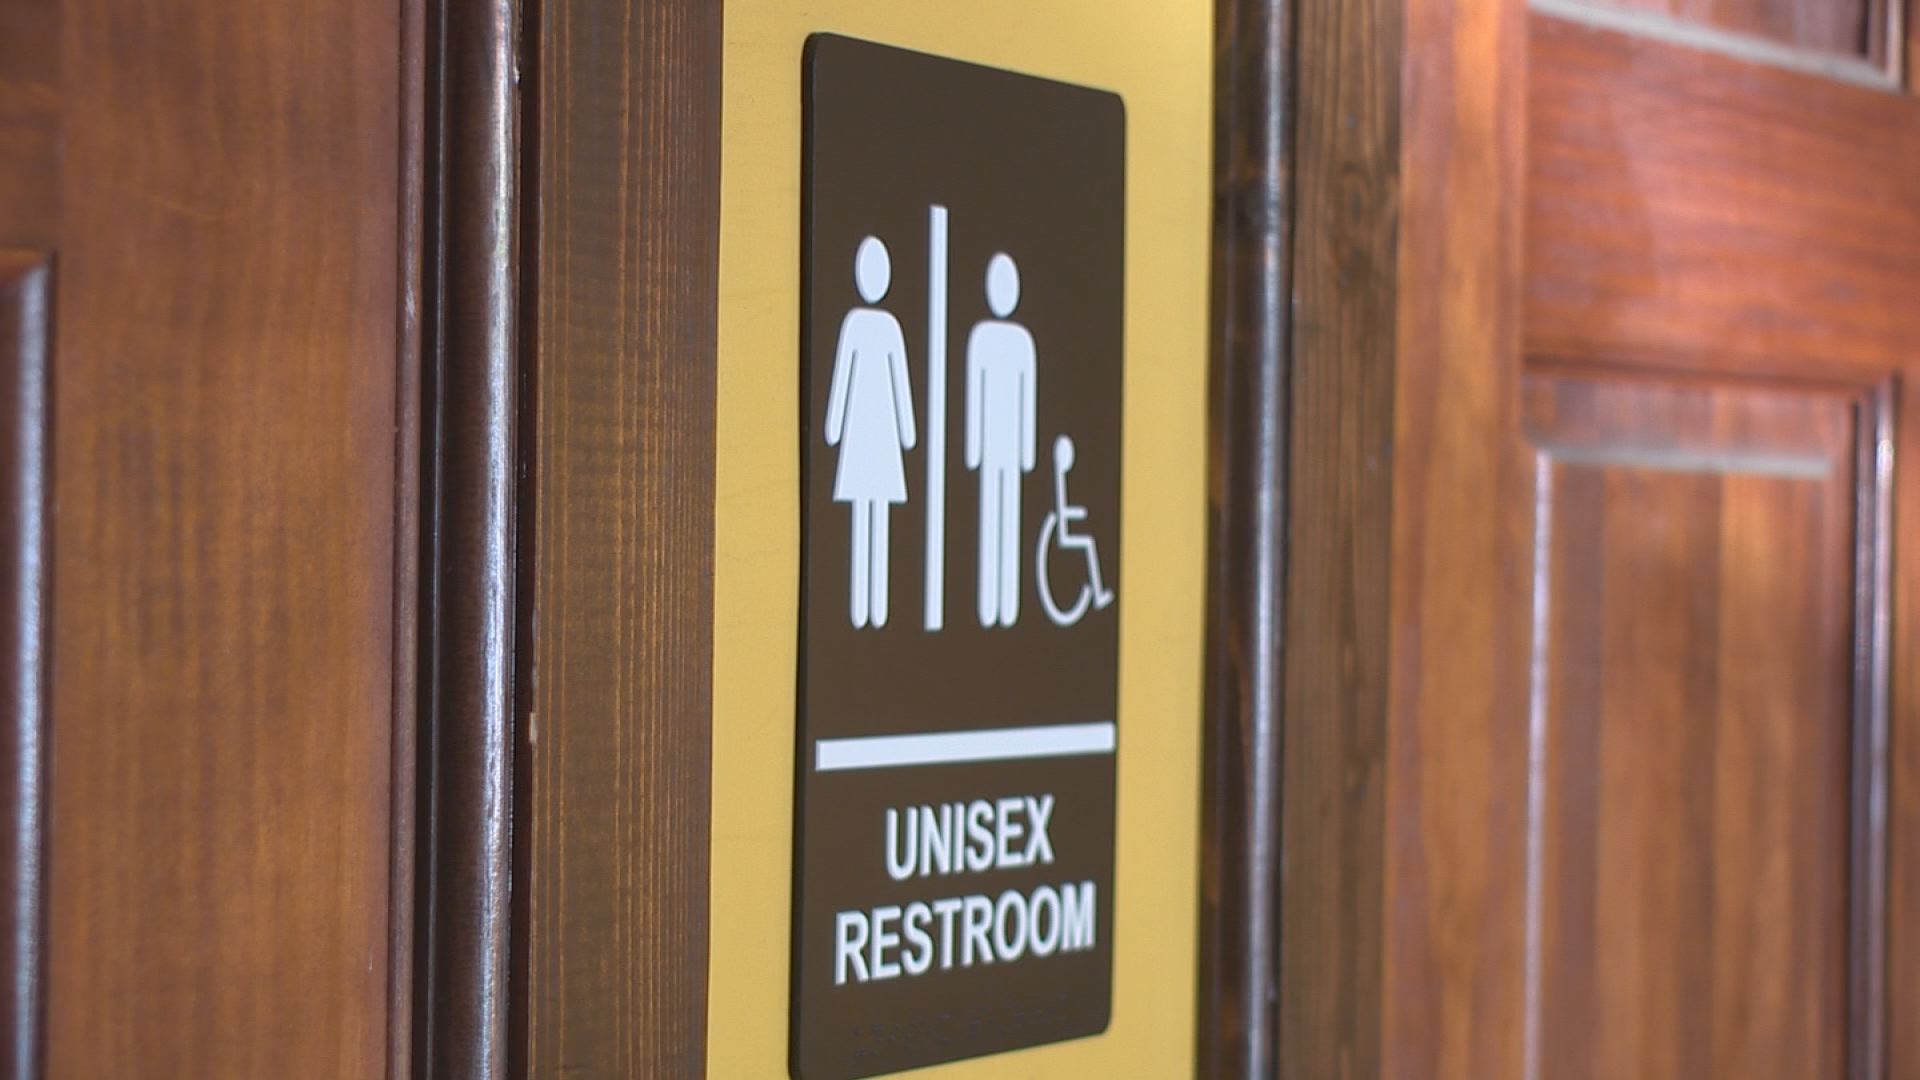 State Rep Pulls Back Controversial Bathroom Bill